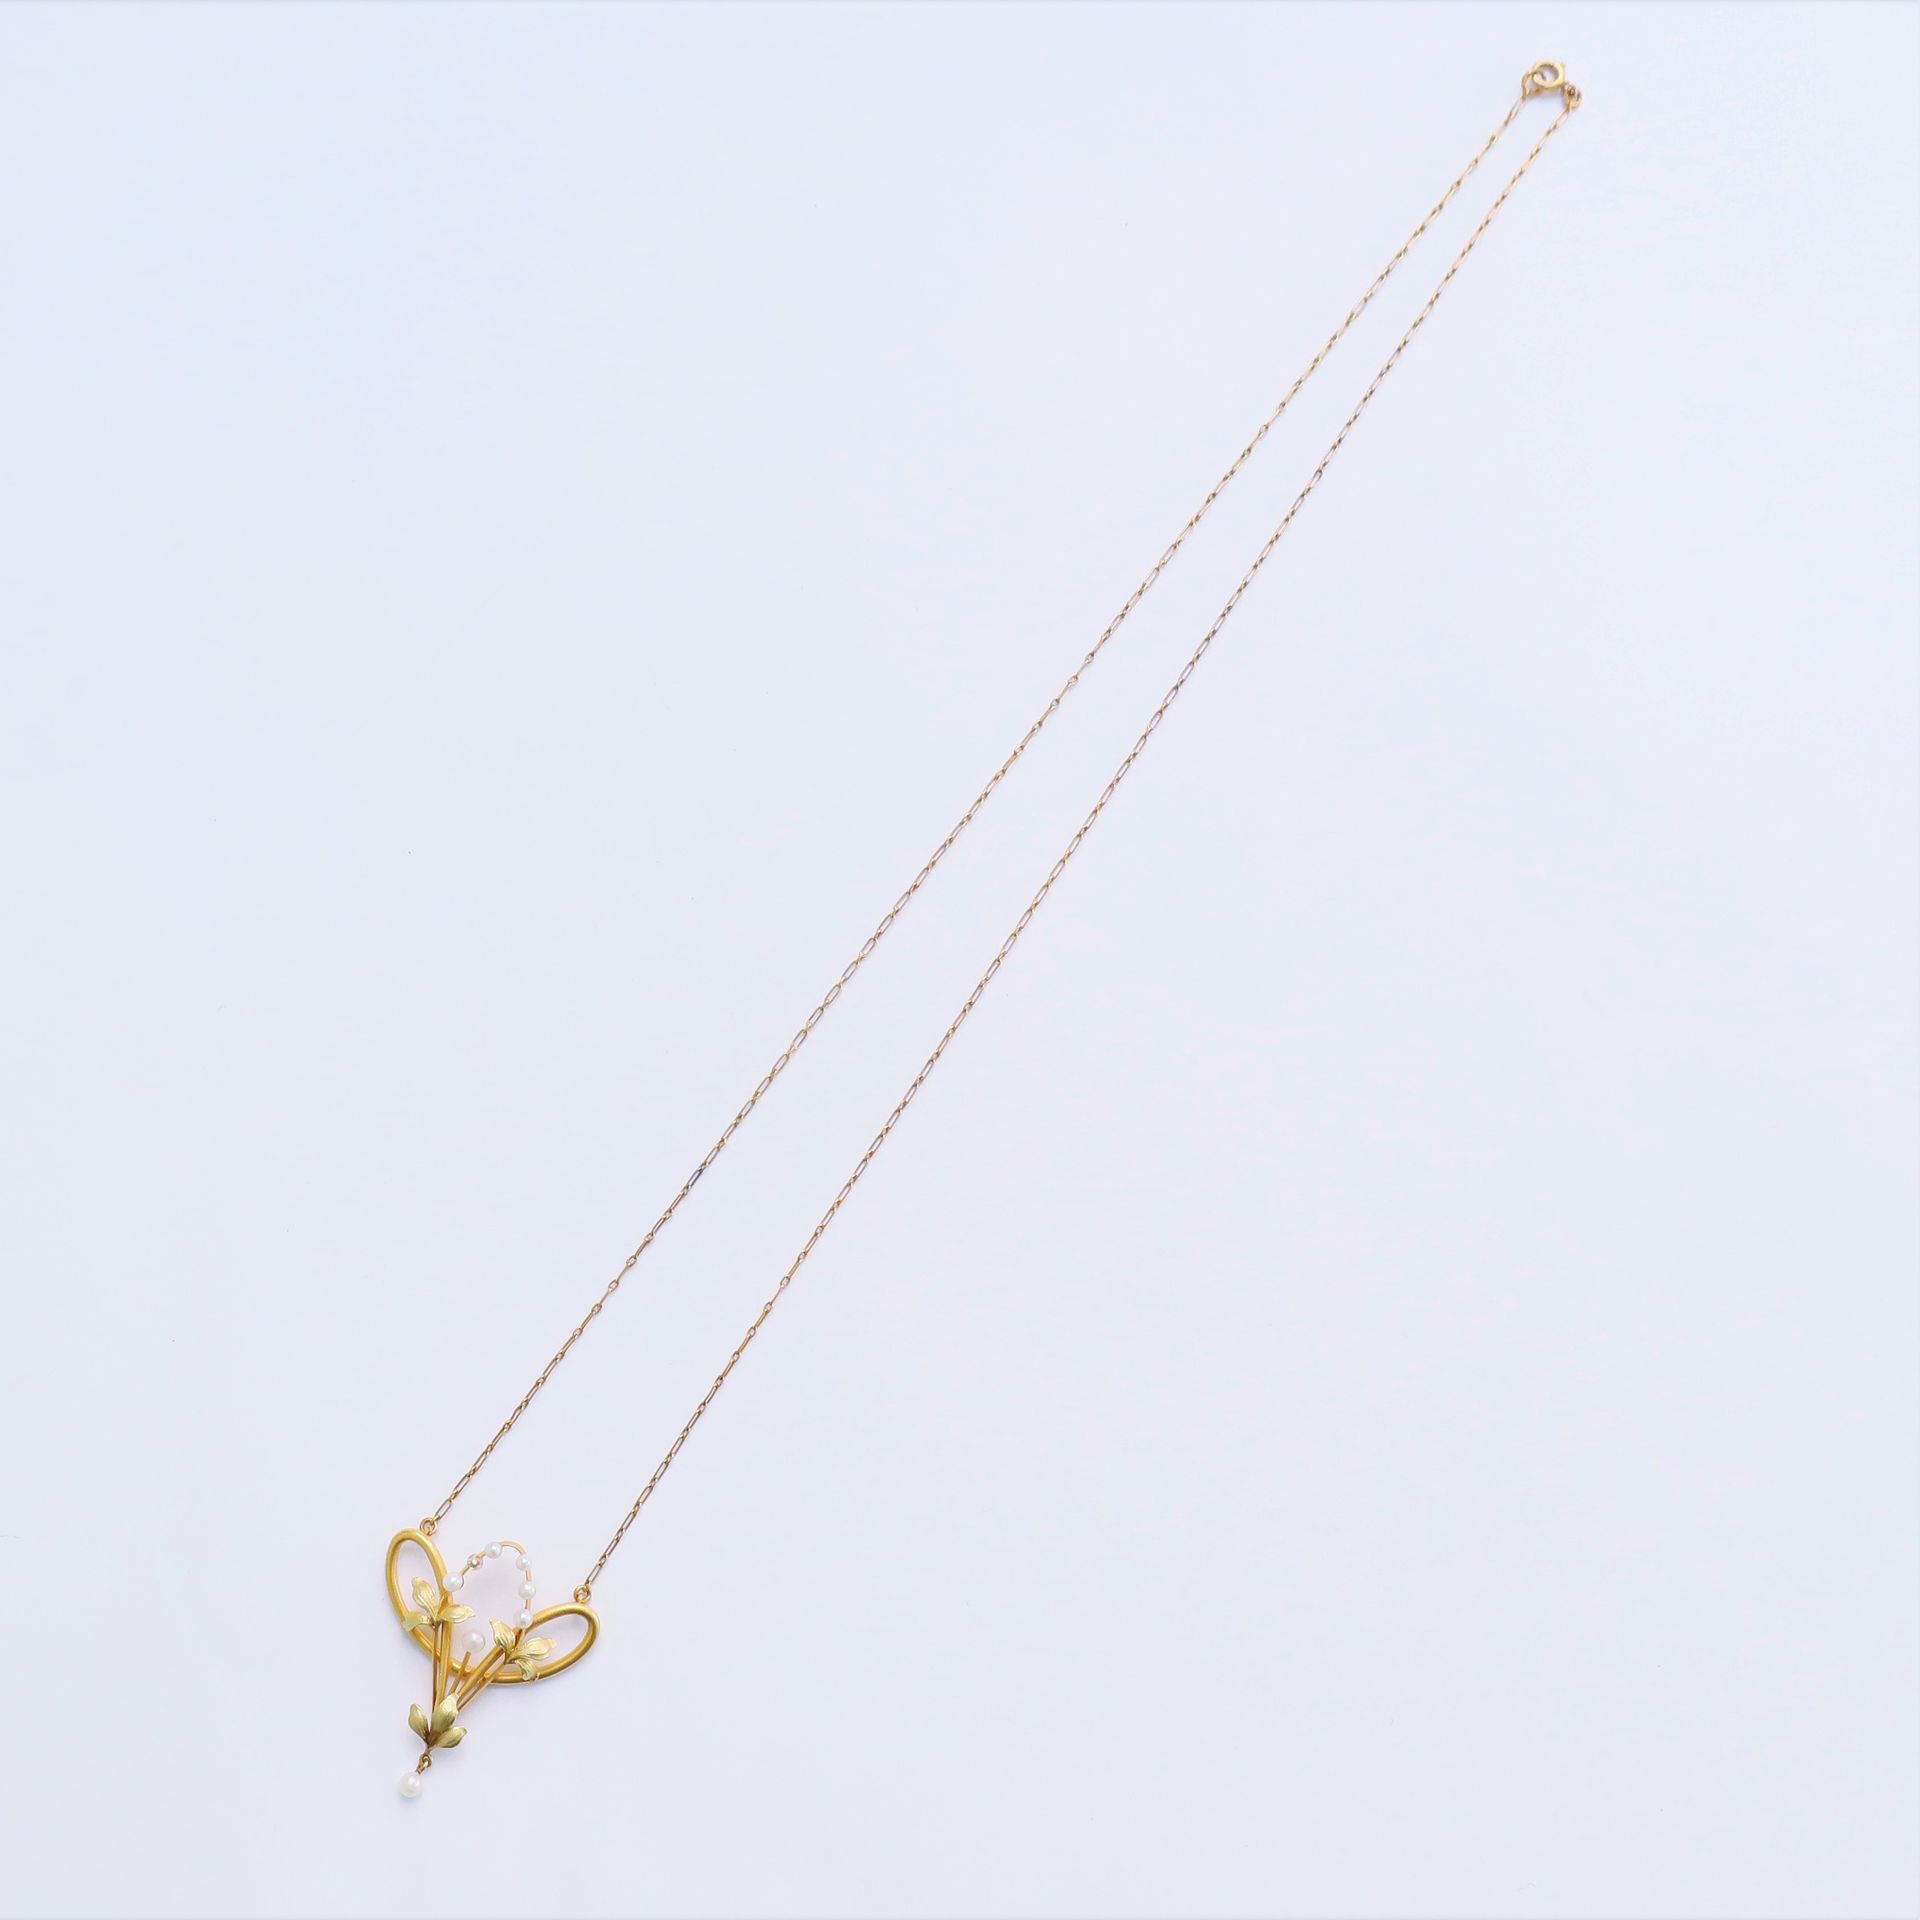 Null A two-tone 18K (750) gold necklace, decorated with a stylized floral design&hellip;